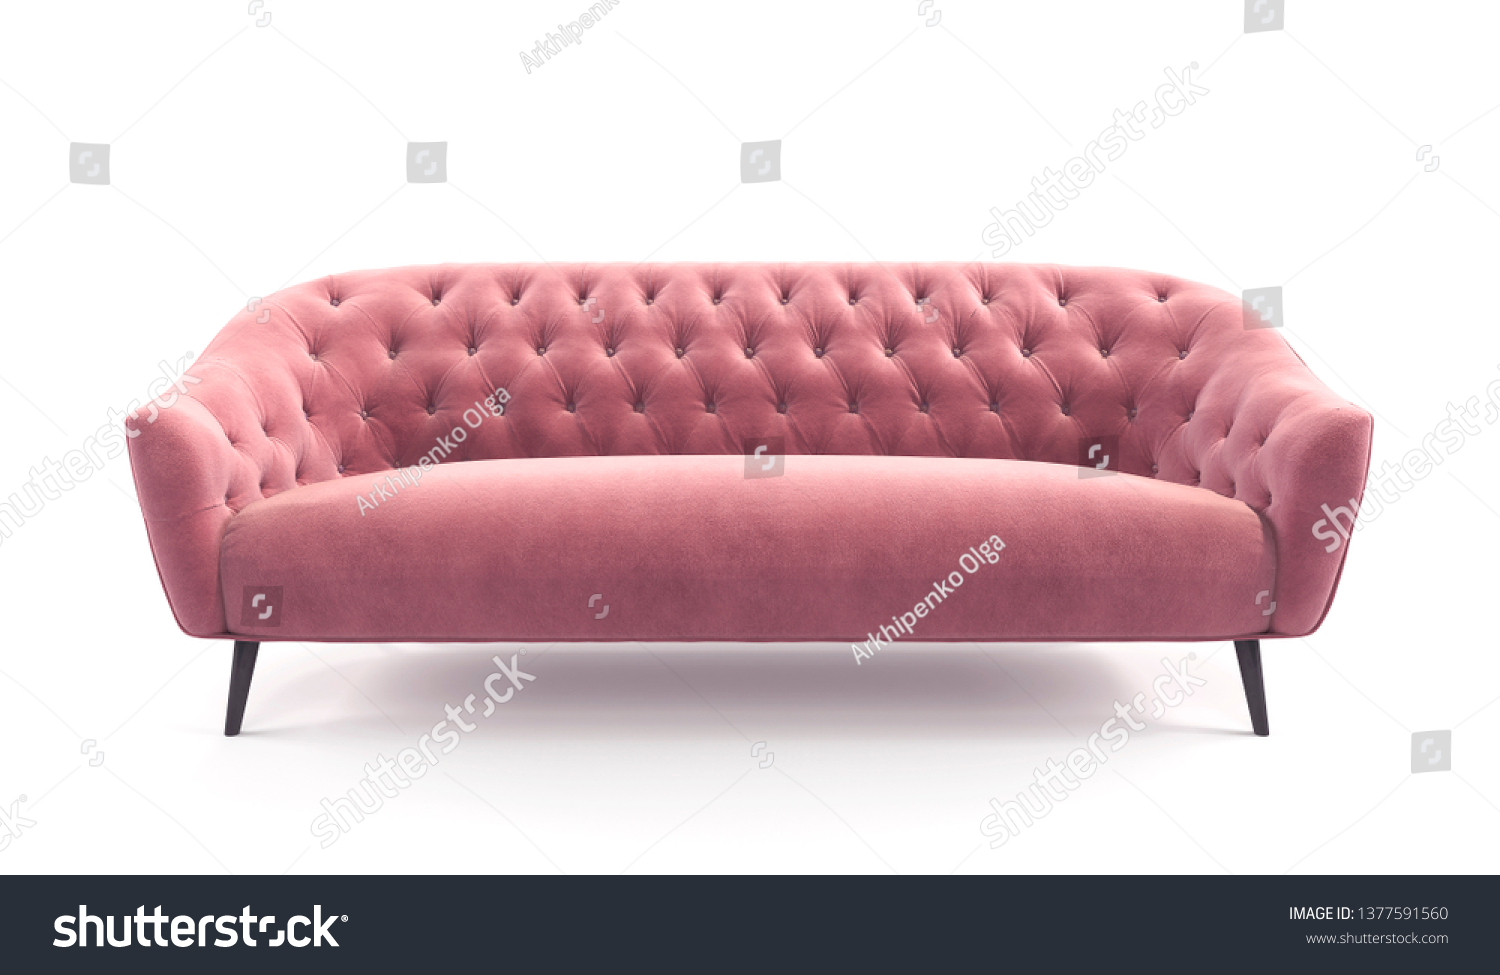 Modern fashionable stylish pink sofa with carriage stitch, buttons, with legs on isolated white background. Furniture, interior object, stylish sofa. Romantic female sofa.  #1377591560